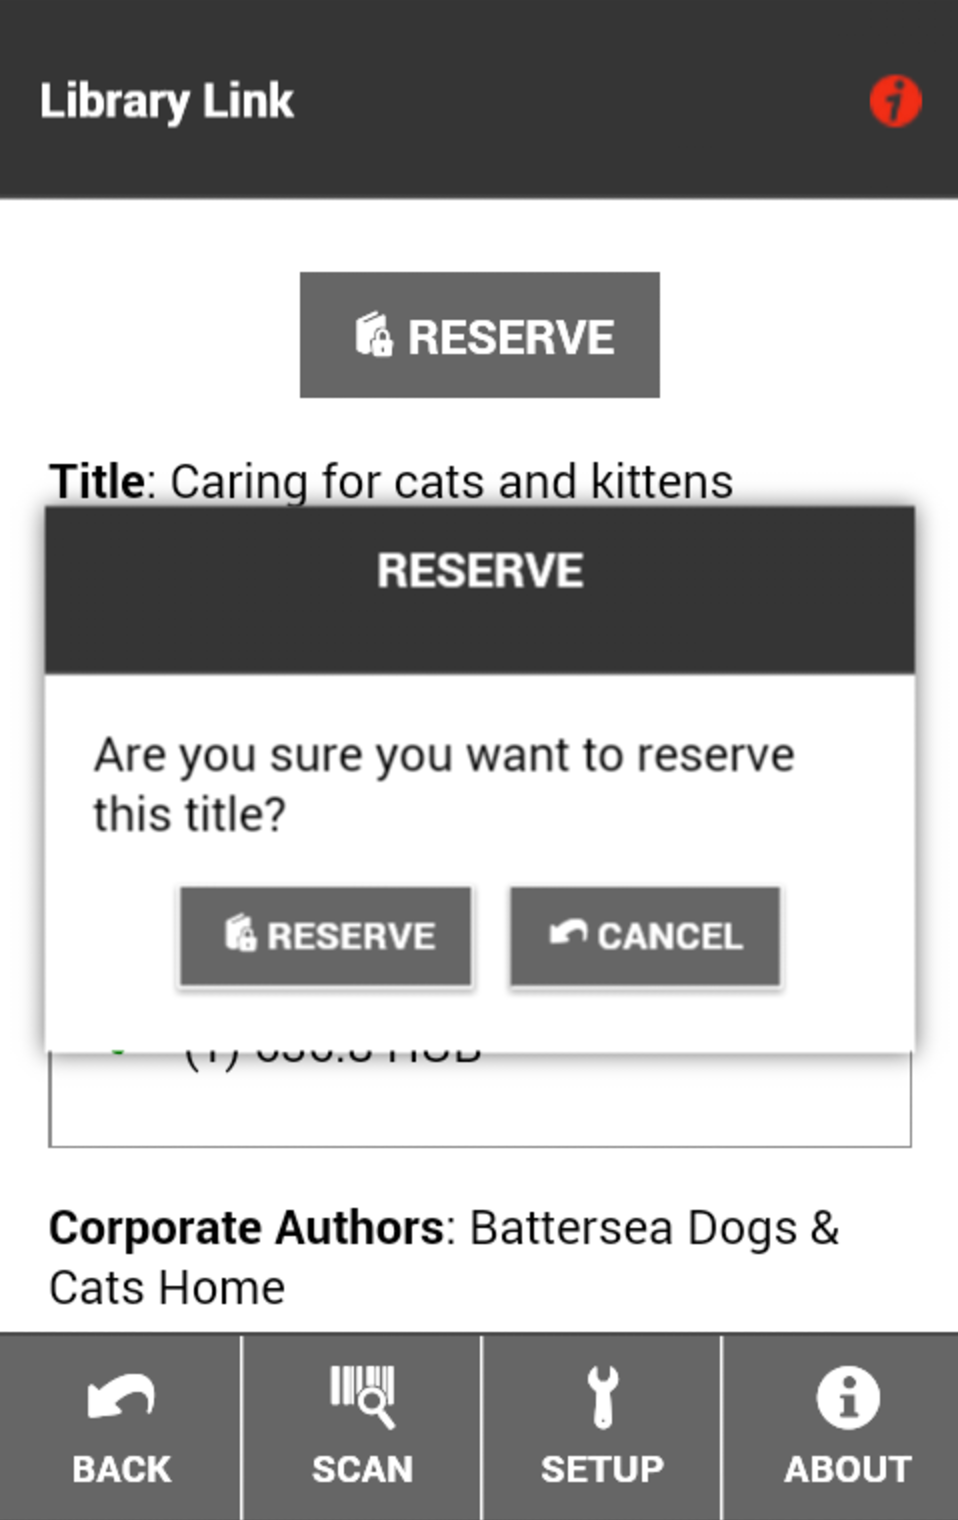 Liberty Software - Users can reserve resources through the Library Link app